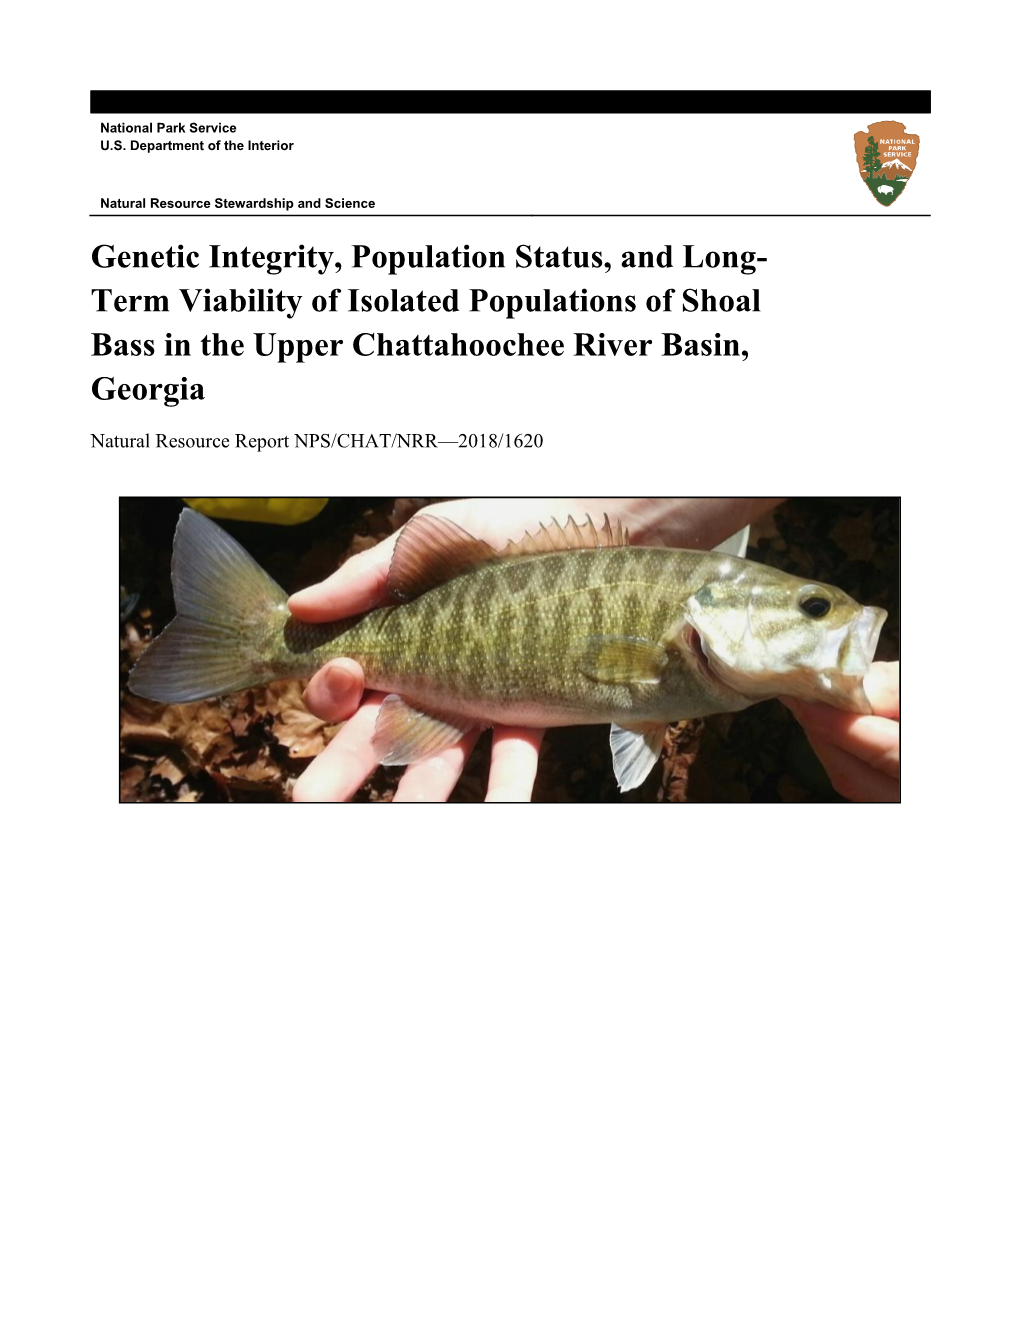 Term Viability of Isolated Populations of Shoal Bass in the Upper Chattahoochee River Basin, Georgia